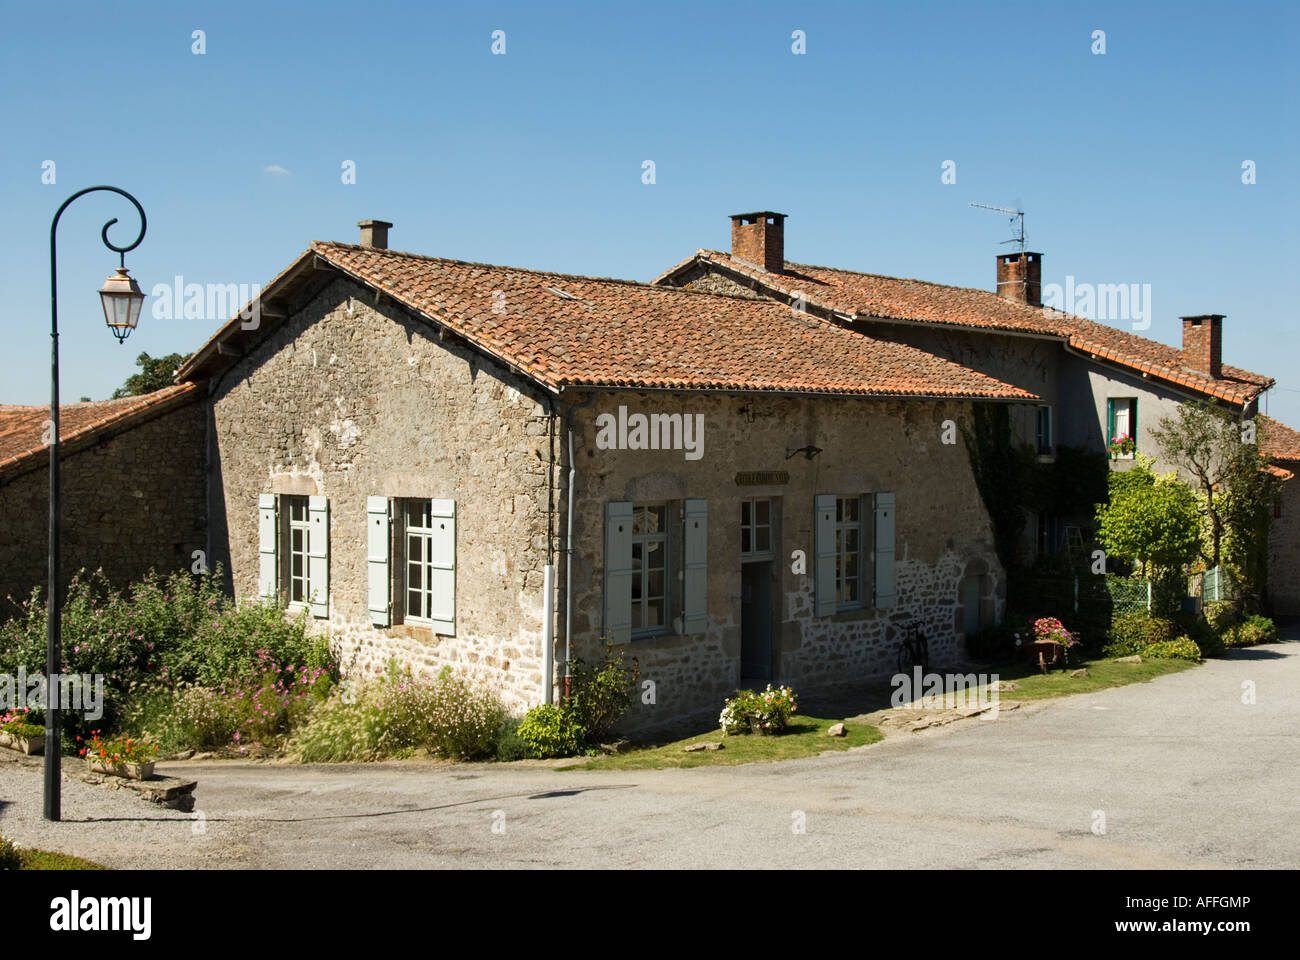 Image of the restored school house in the village of Montrol Senard in the Limousin region of France Stock Photo